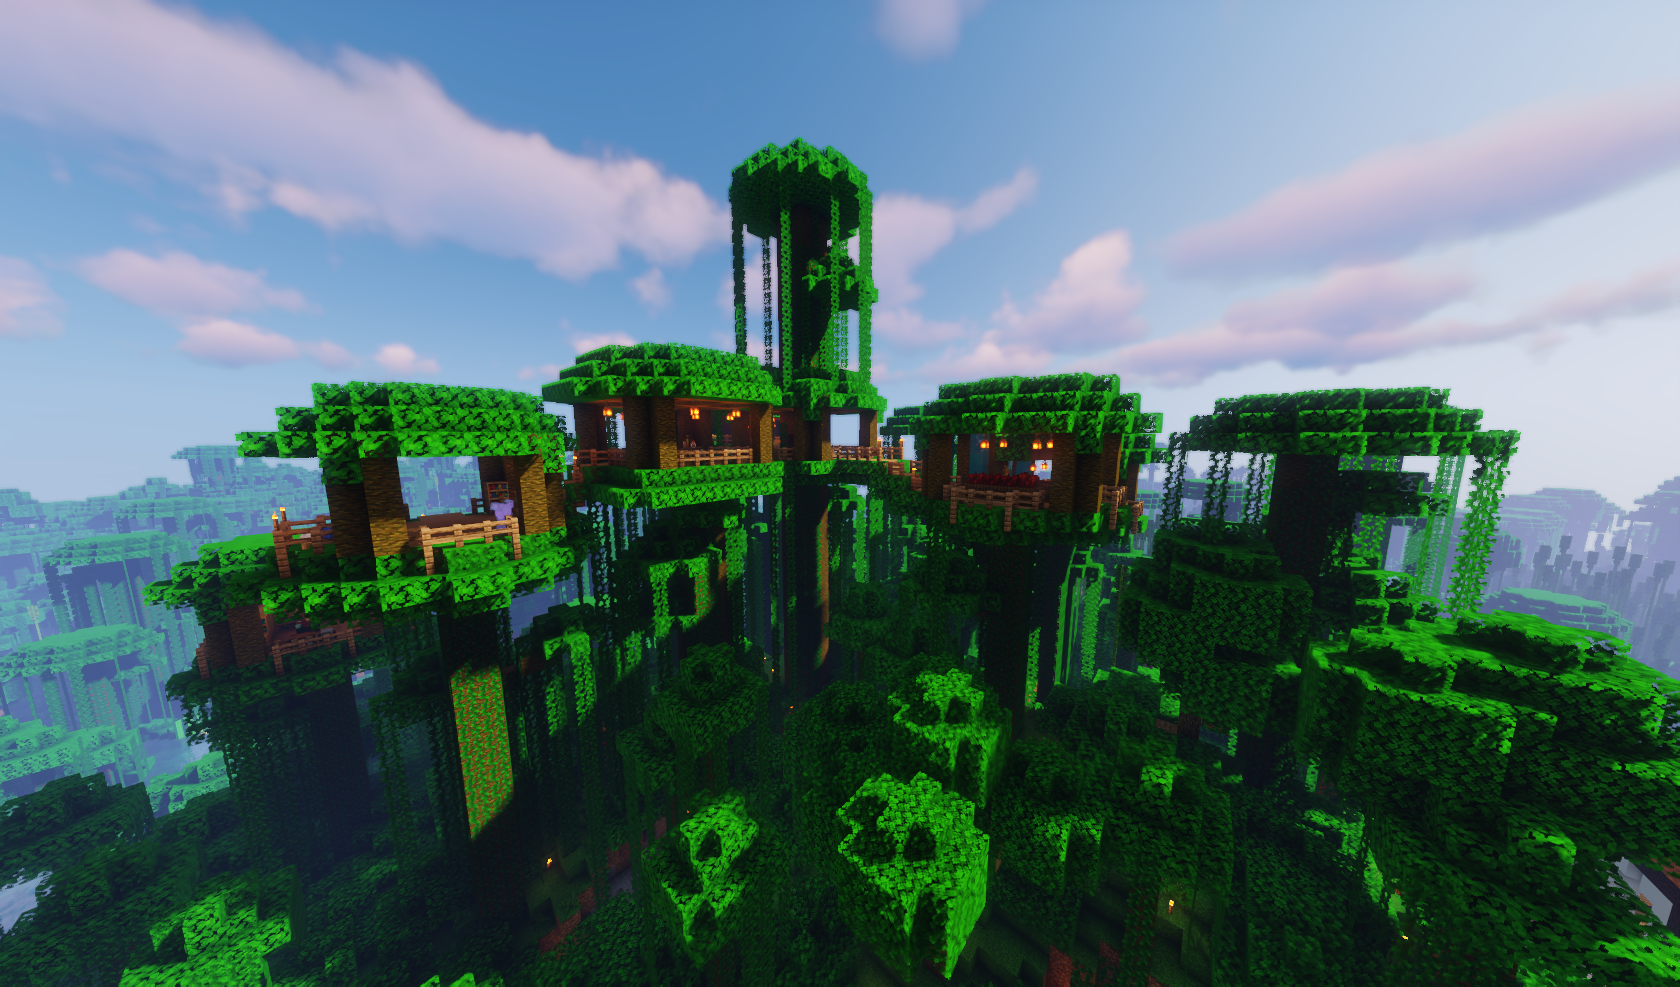 A treehouse in Minecraft made up of multiple rooms set on the tops of jungle trees.